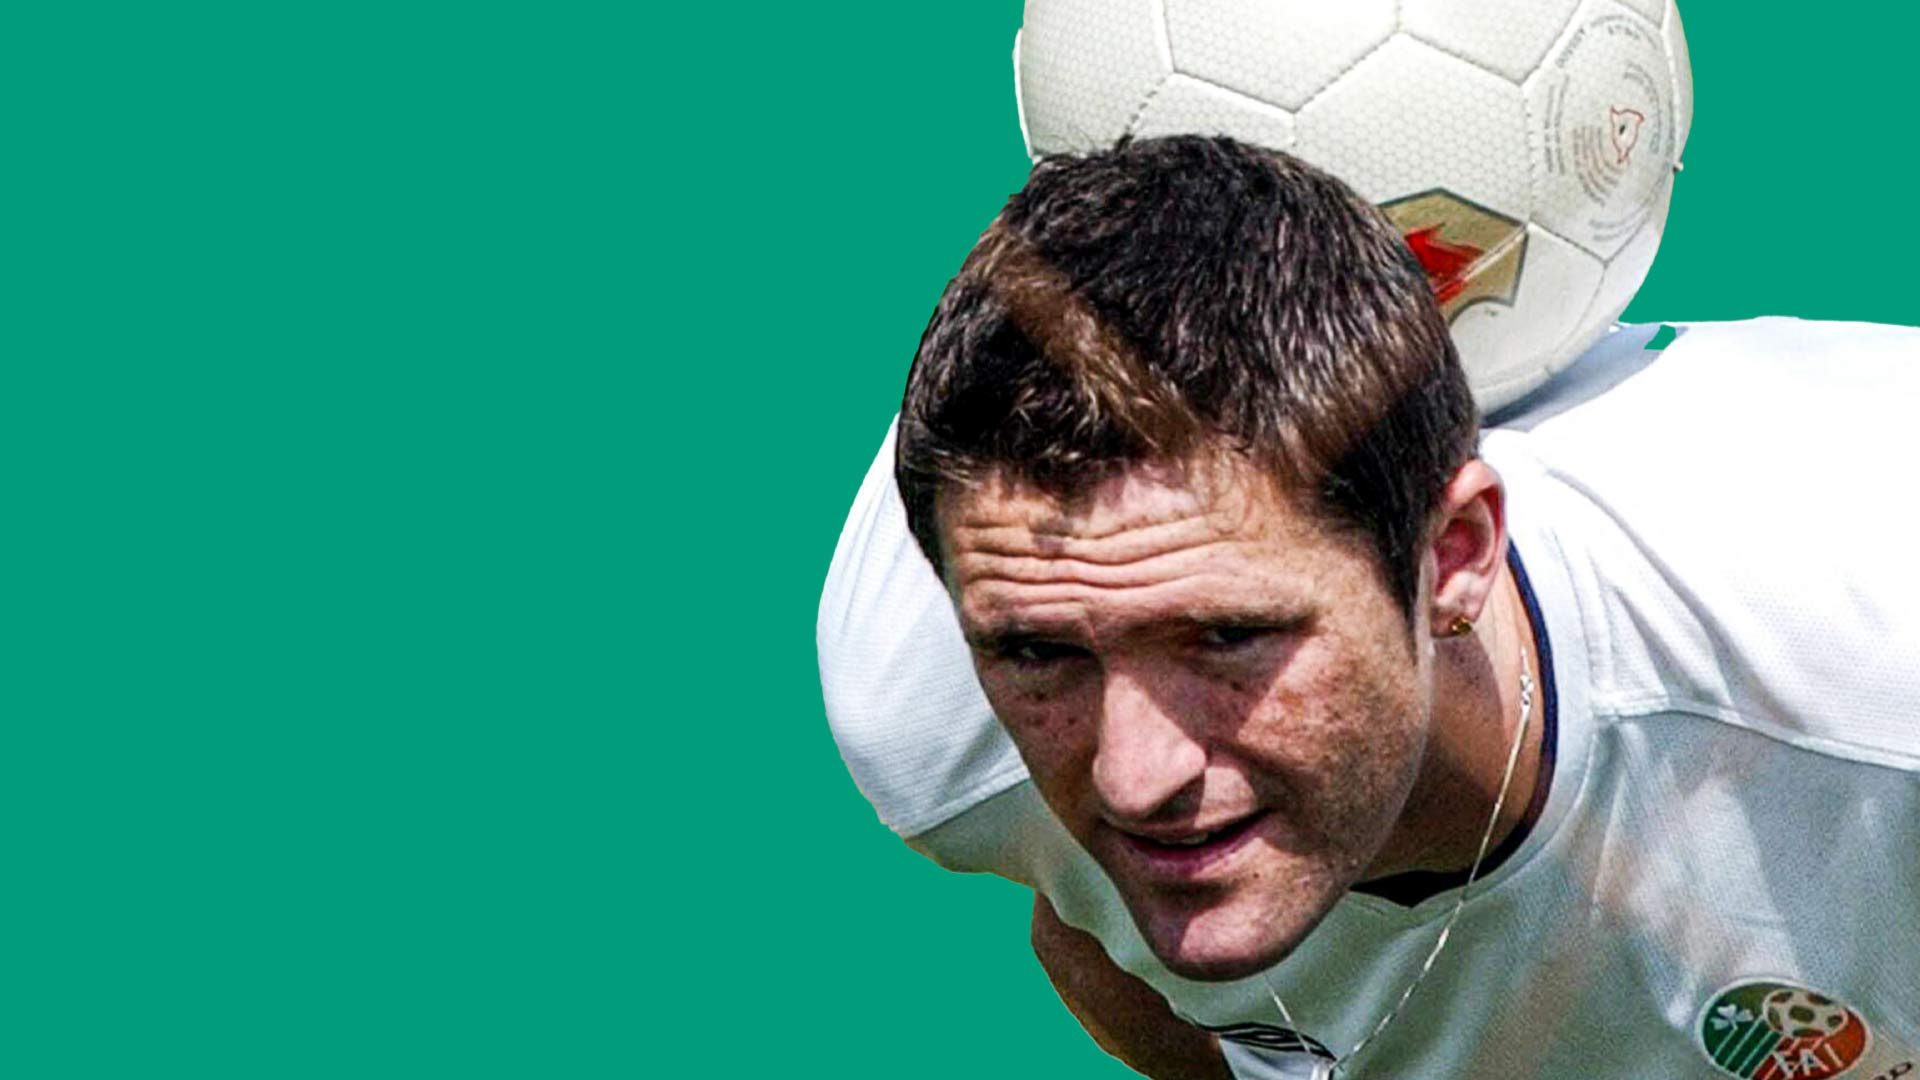 Robbie Keane balancing a 2002 World Cup ball on the back of his neck, because he's cool